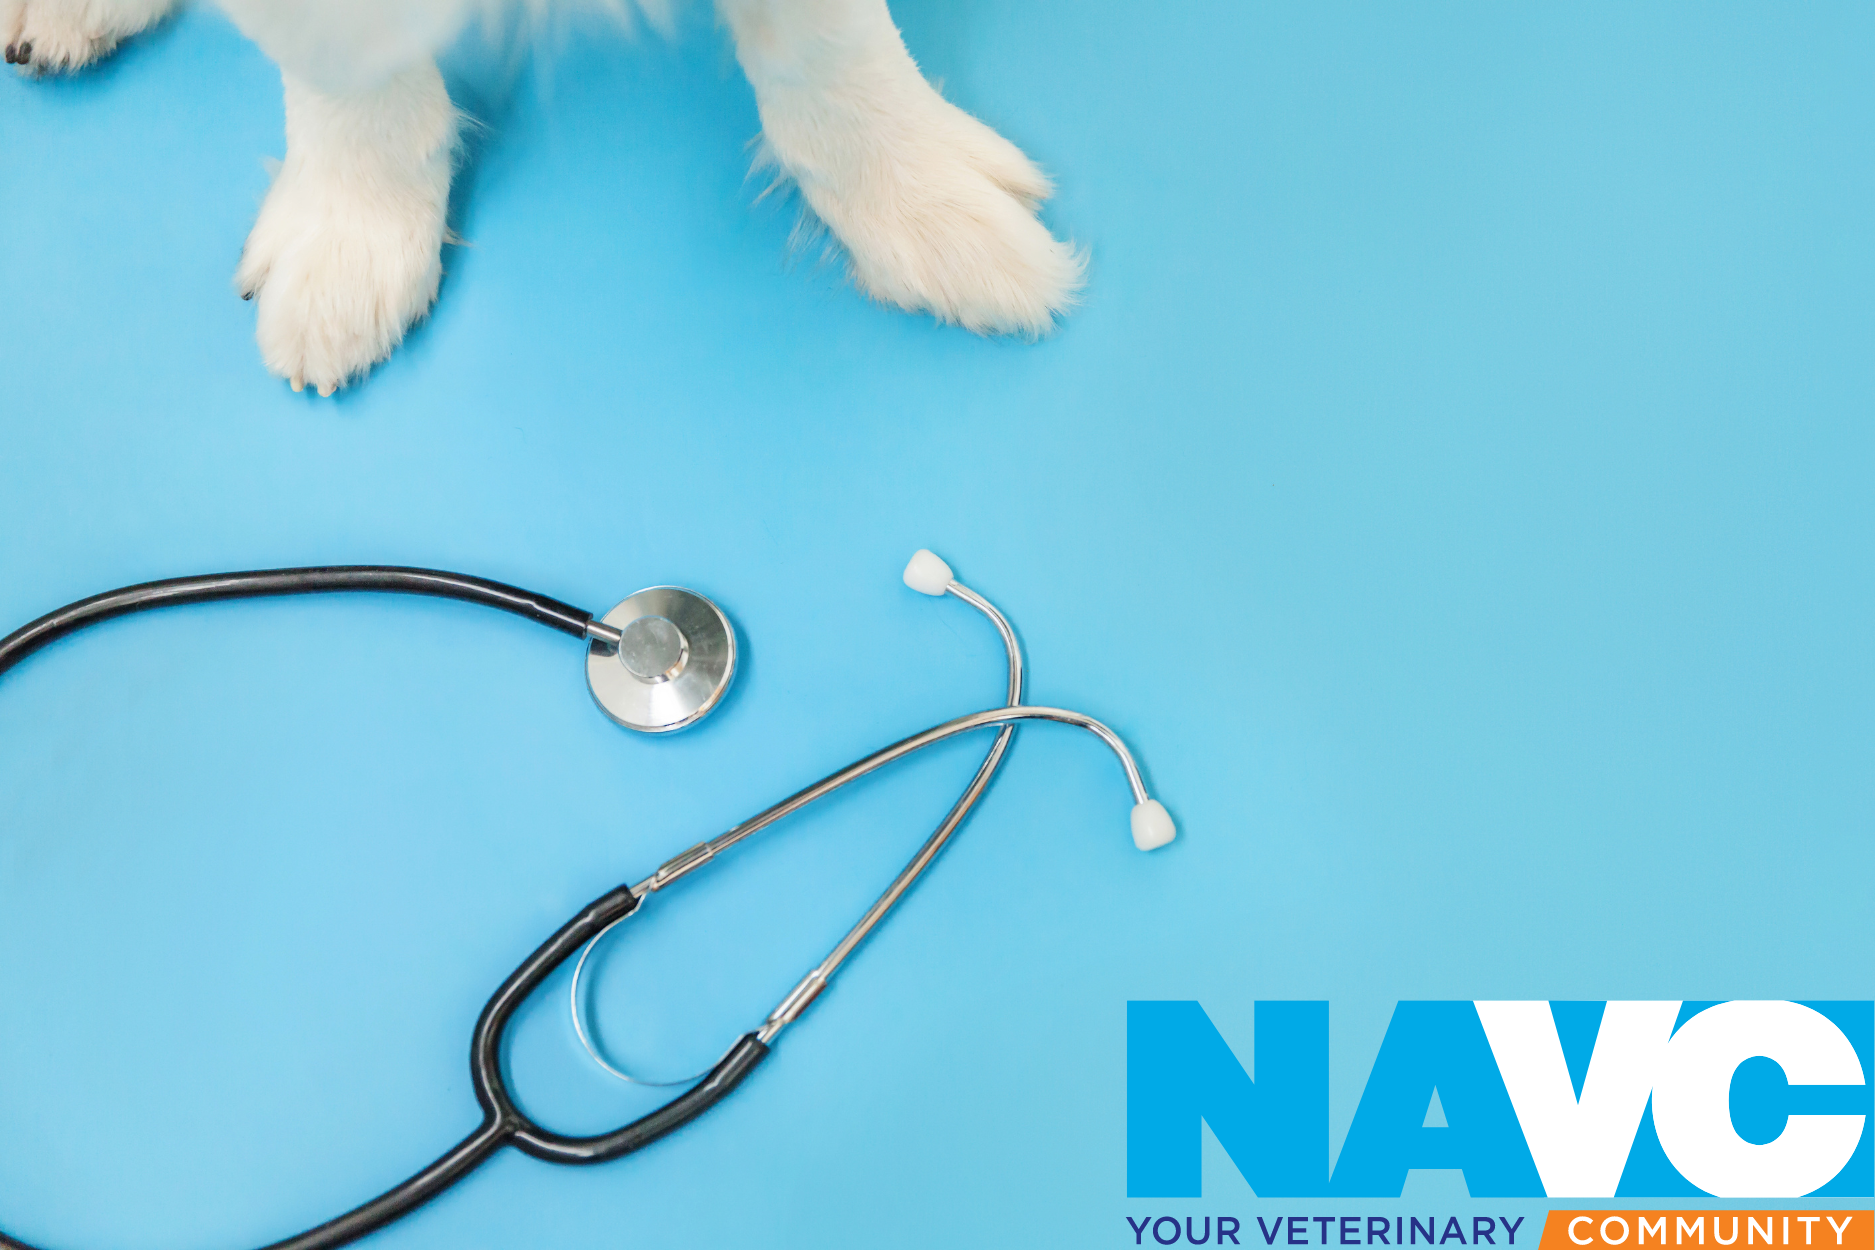 A blue background with a doctor stethoscope in front and puppy paws in the corner. There is a NAVC company logo in the corner as well.